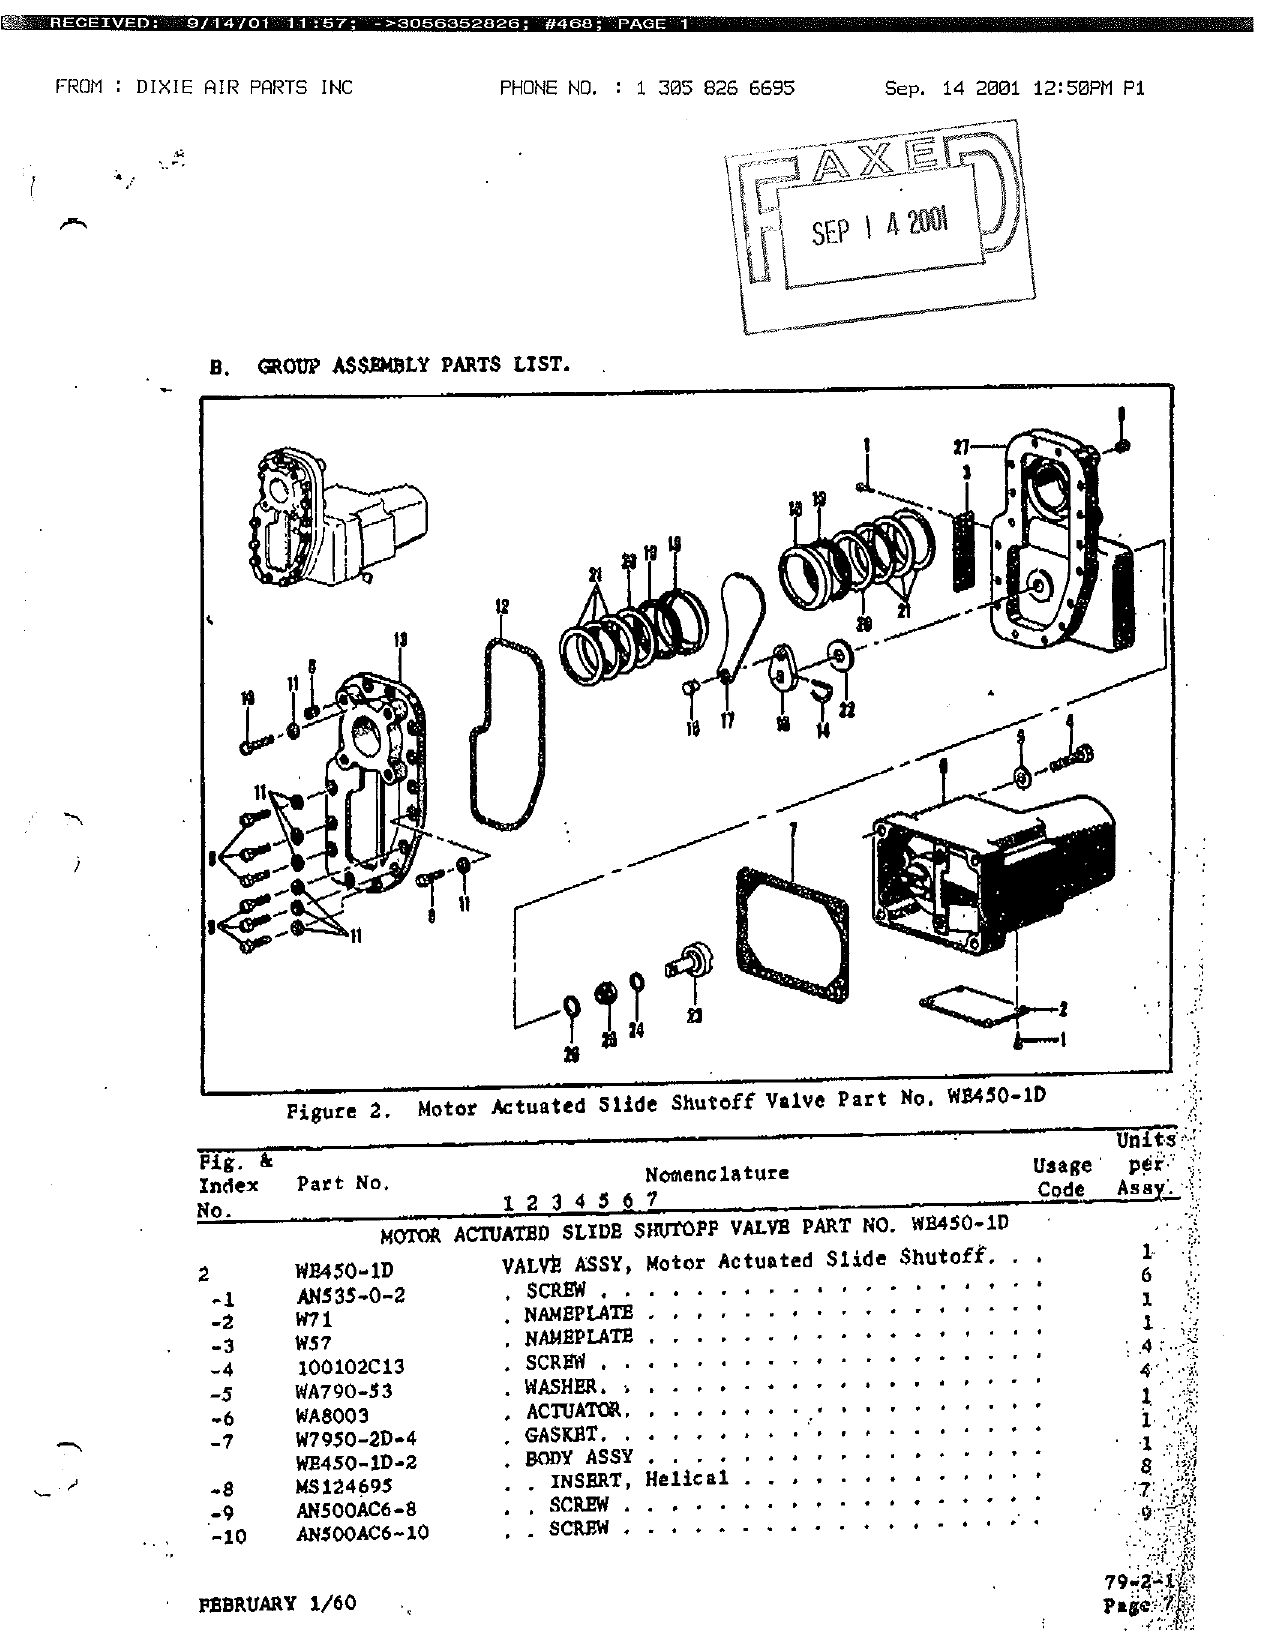 Sample page 5 from AirCorps Library document: Overhaul with Parts Breakdown for Motor Actuated Slide Shut-Off Valve Assembly - Part WE450-1D 